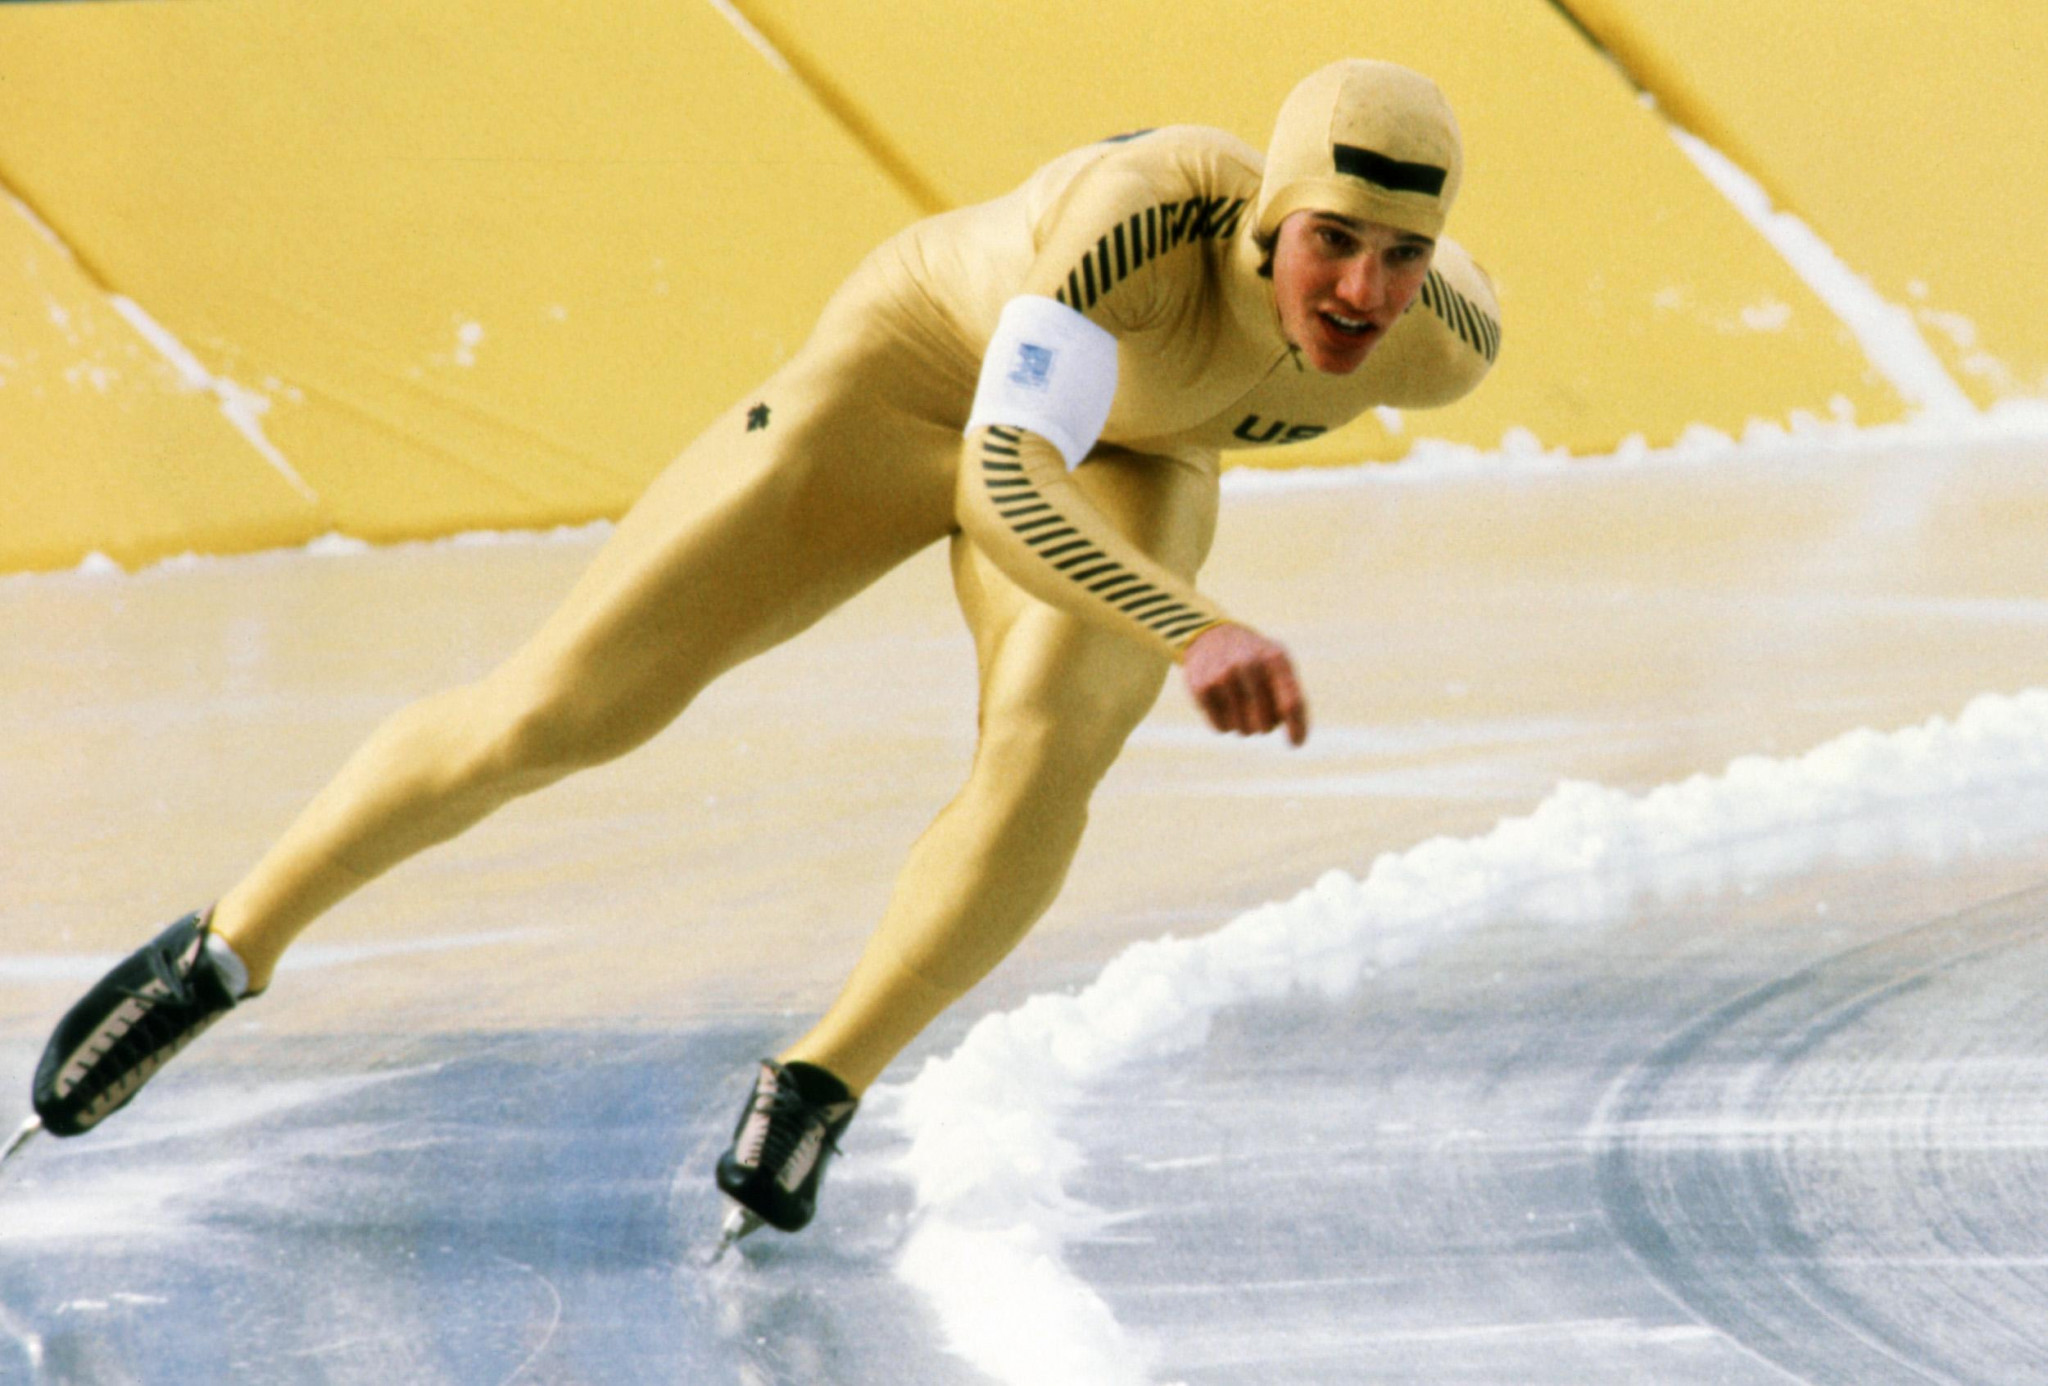 Five-time Olympic speed skating gold medallist and multiple world champion Eric Heiden is one of the Park City-based members of the Committee ©Getty Images